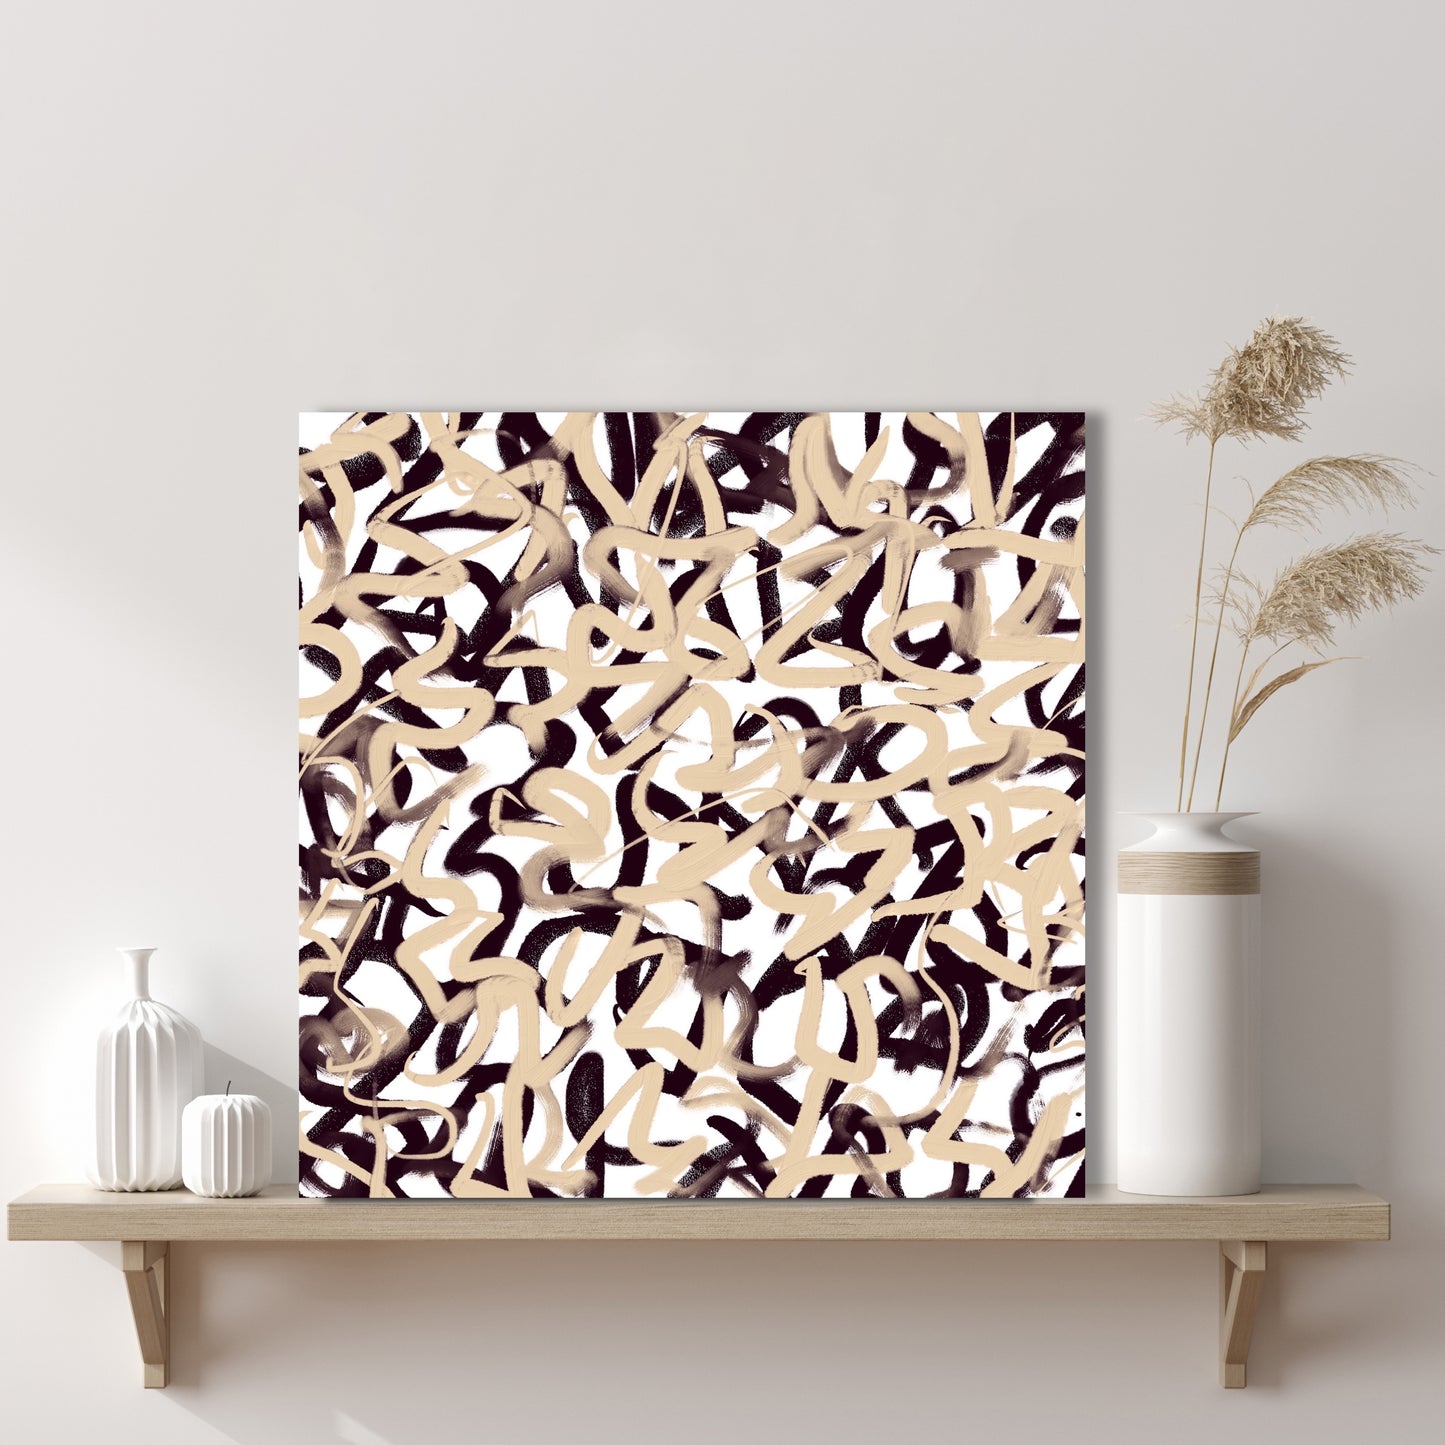 'Footsteps In The Sand' canvas print - small size perfect for a little shelf with organic ornaments and a white vase with dry grasses reminiscent of those growing on sand dunes.